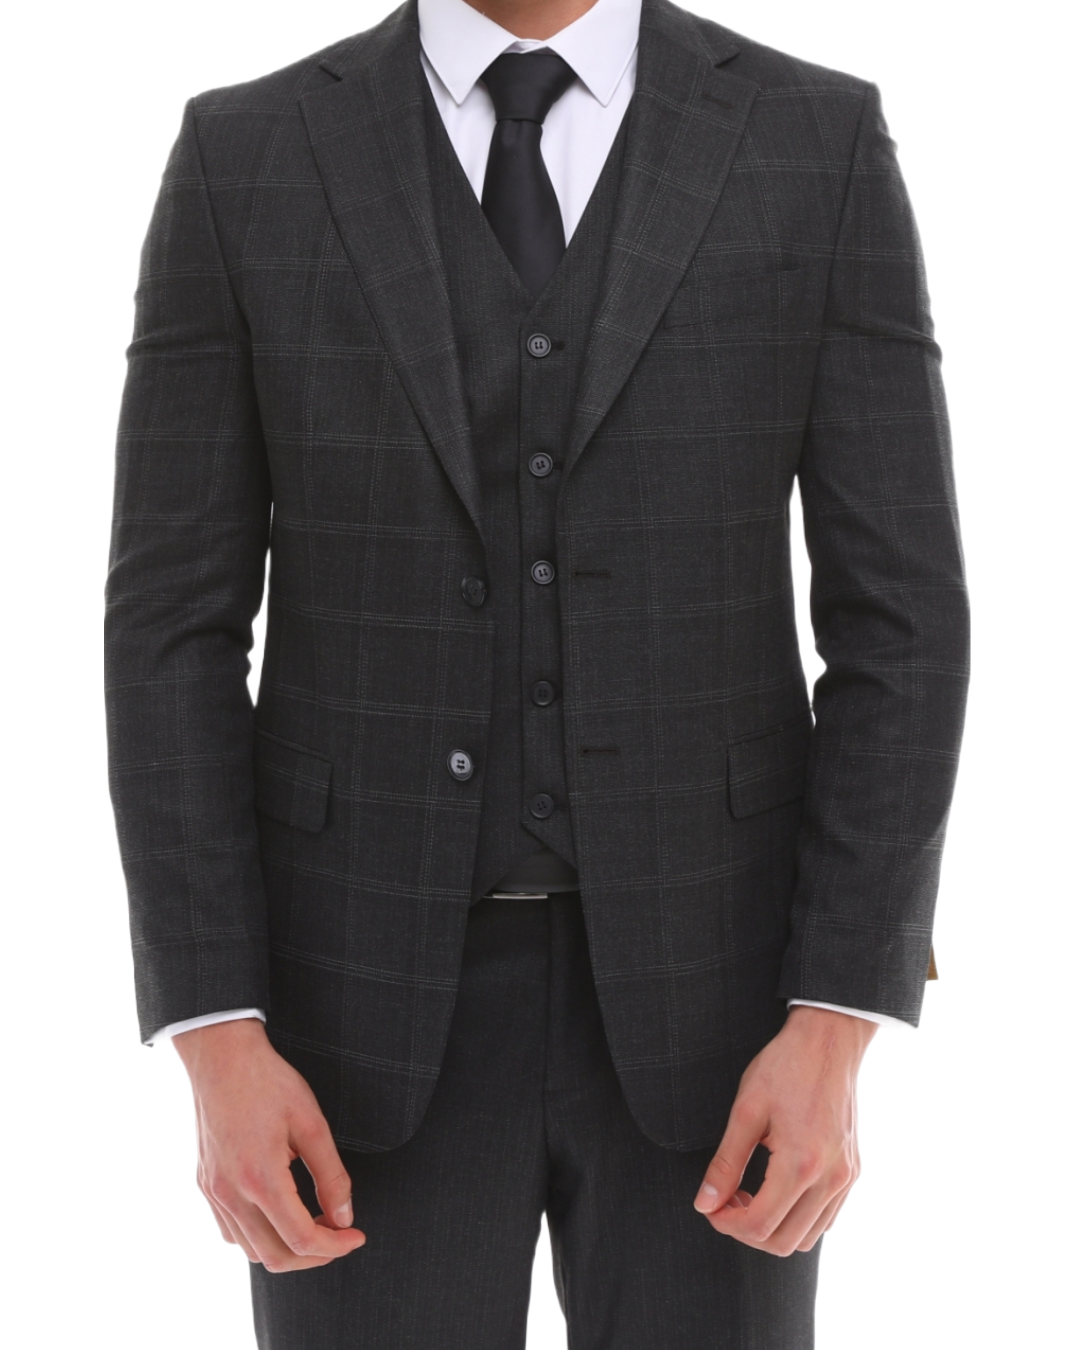 ICONYN VERDE - Black Mixed & Matched Three Piece Suit